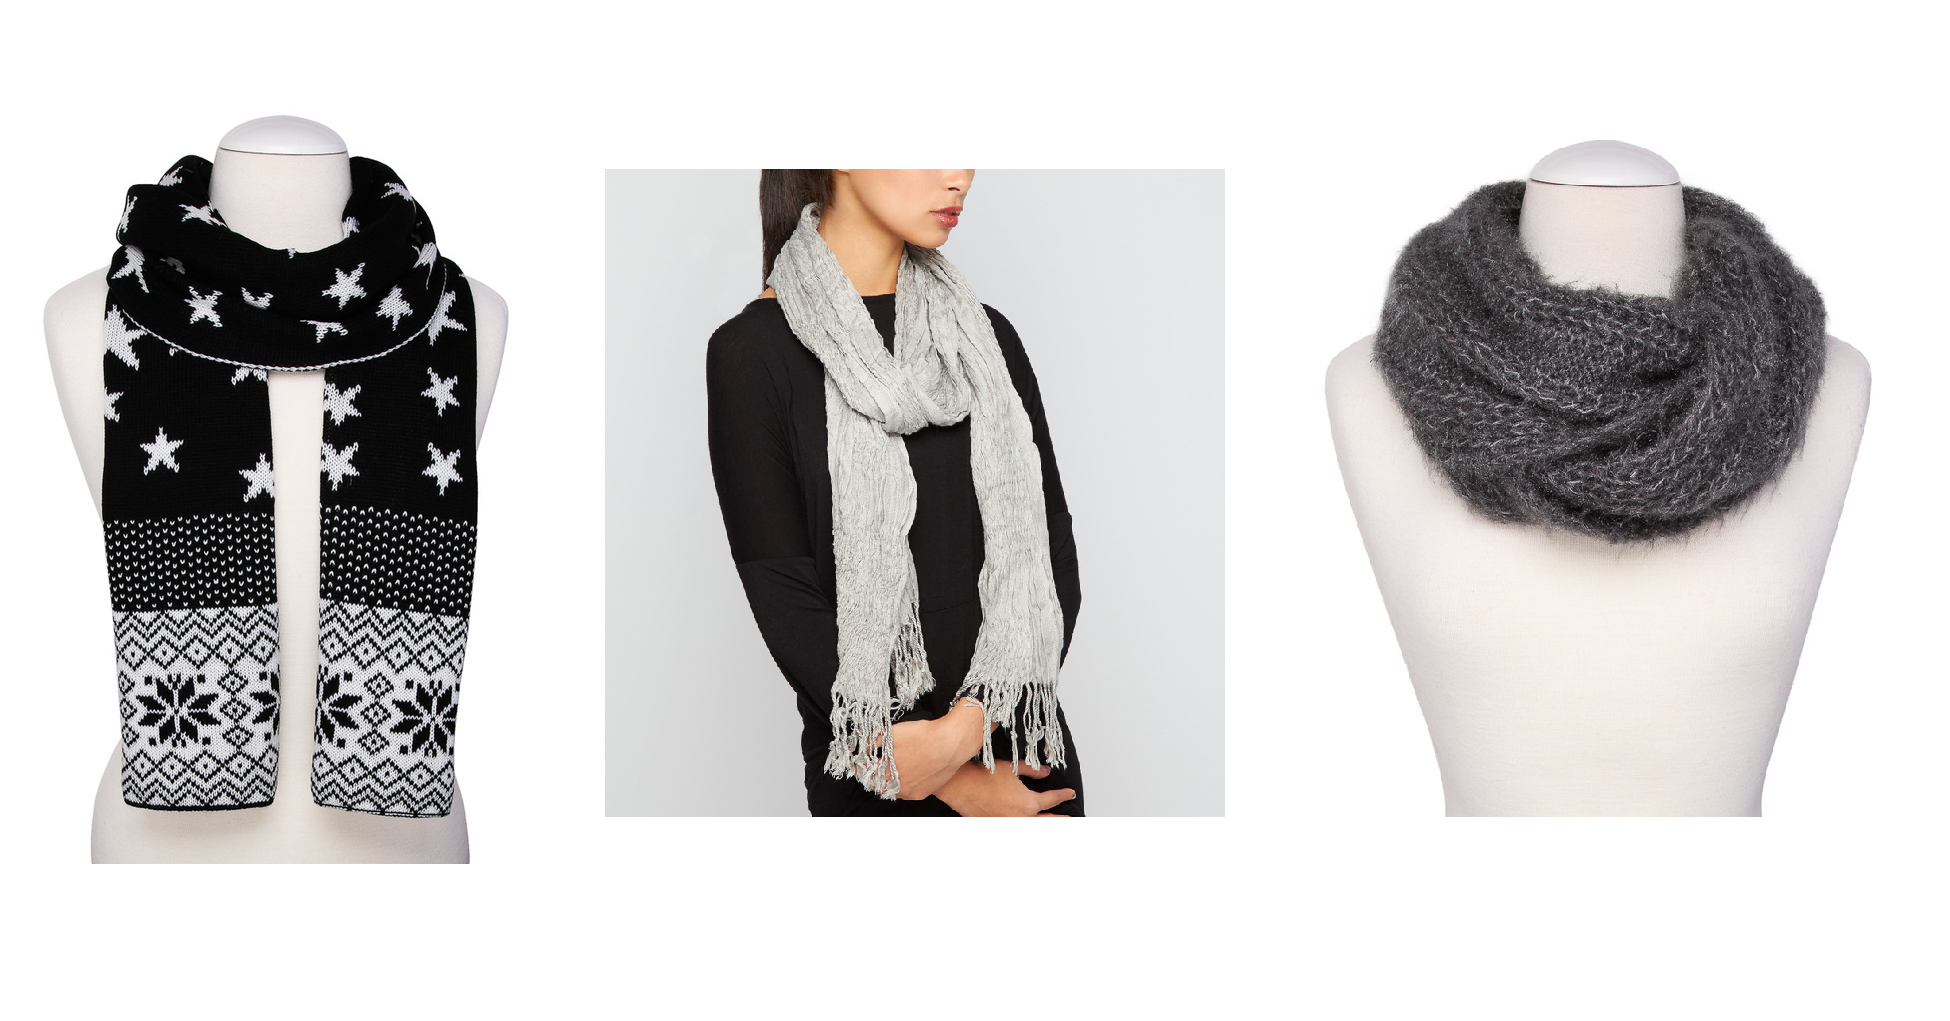 Fall Scarves On Sale at Hollar! Prices Start at $2.00 + Save An Extra 20% Off One Item!